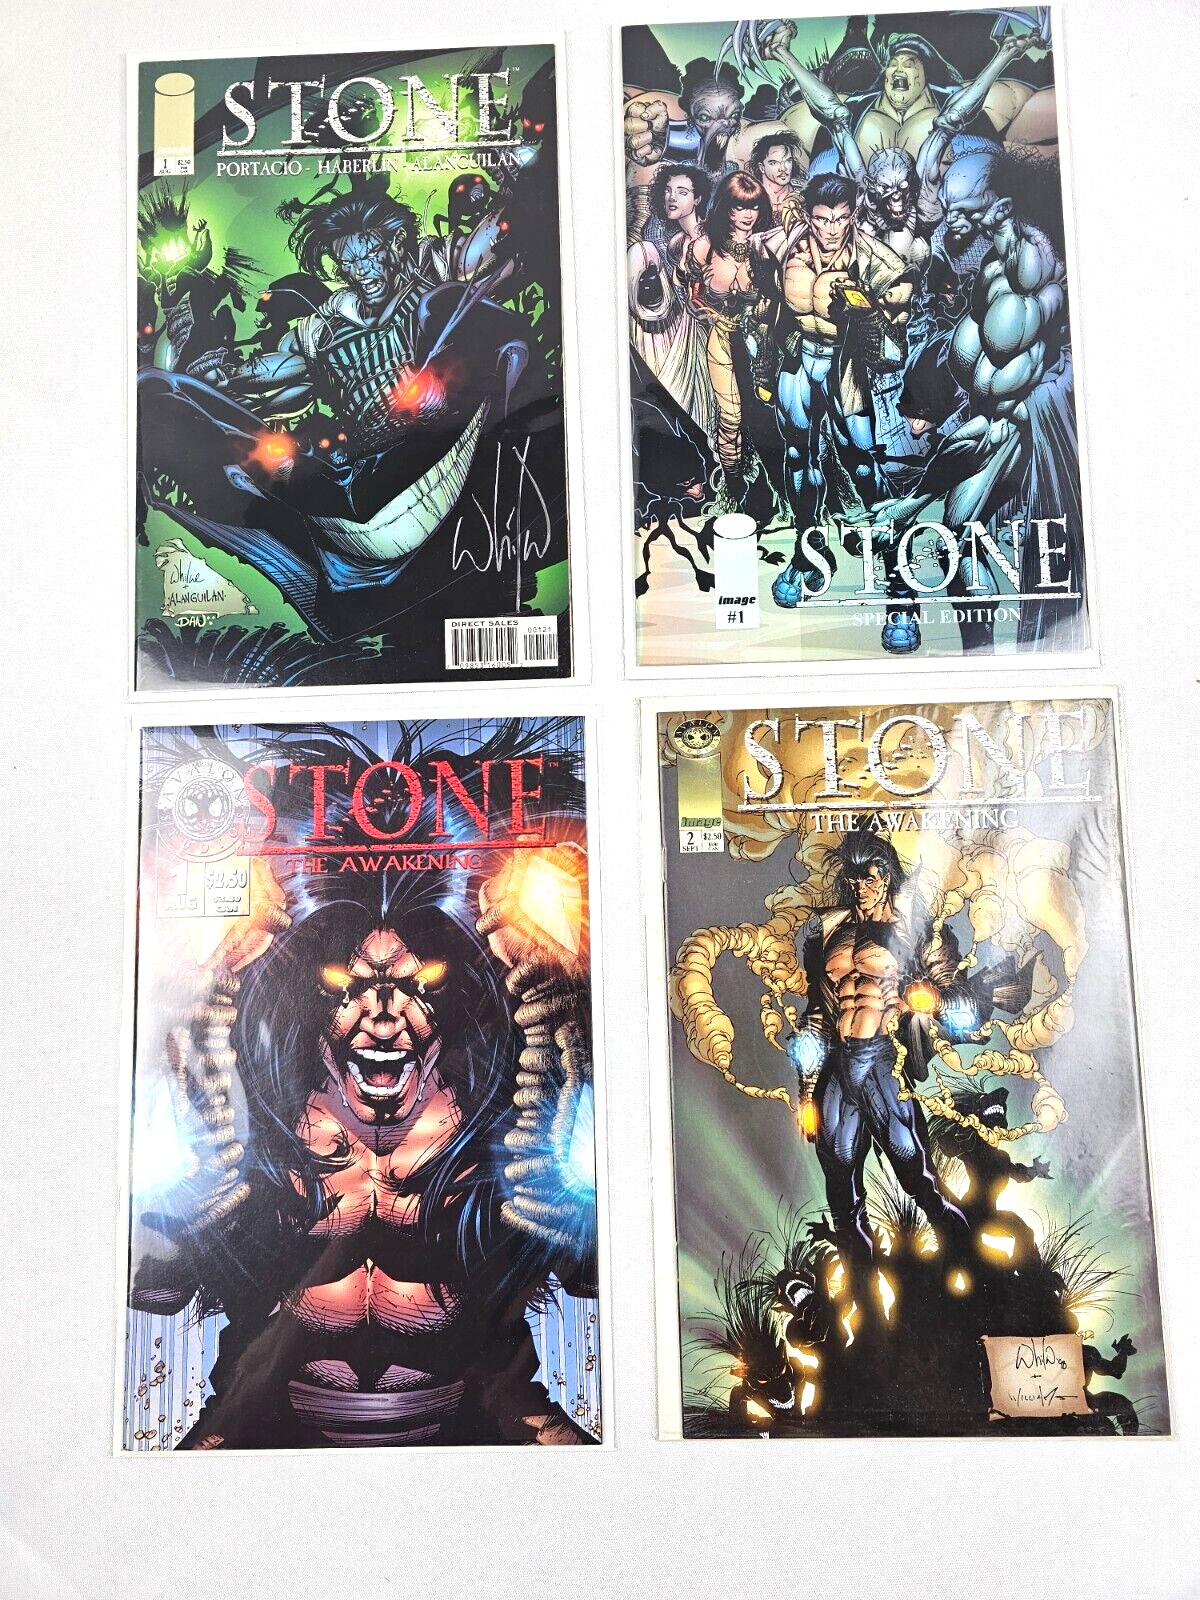 3 Stone #1 Aug 1994 Signed by Whilce Portacio Avalon Studios Image 3 Variants+#2